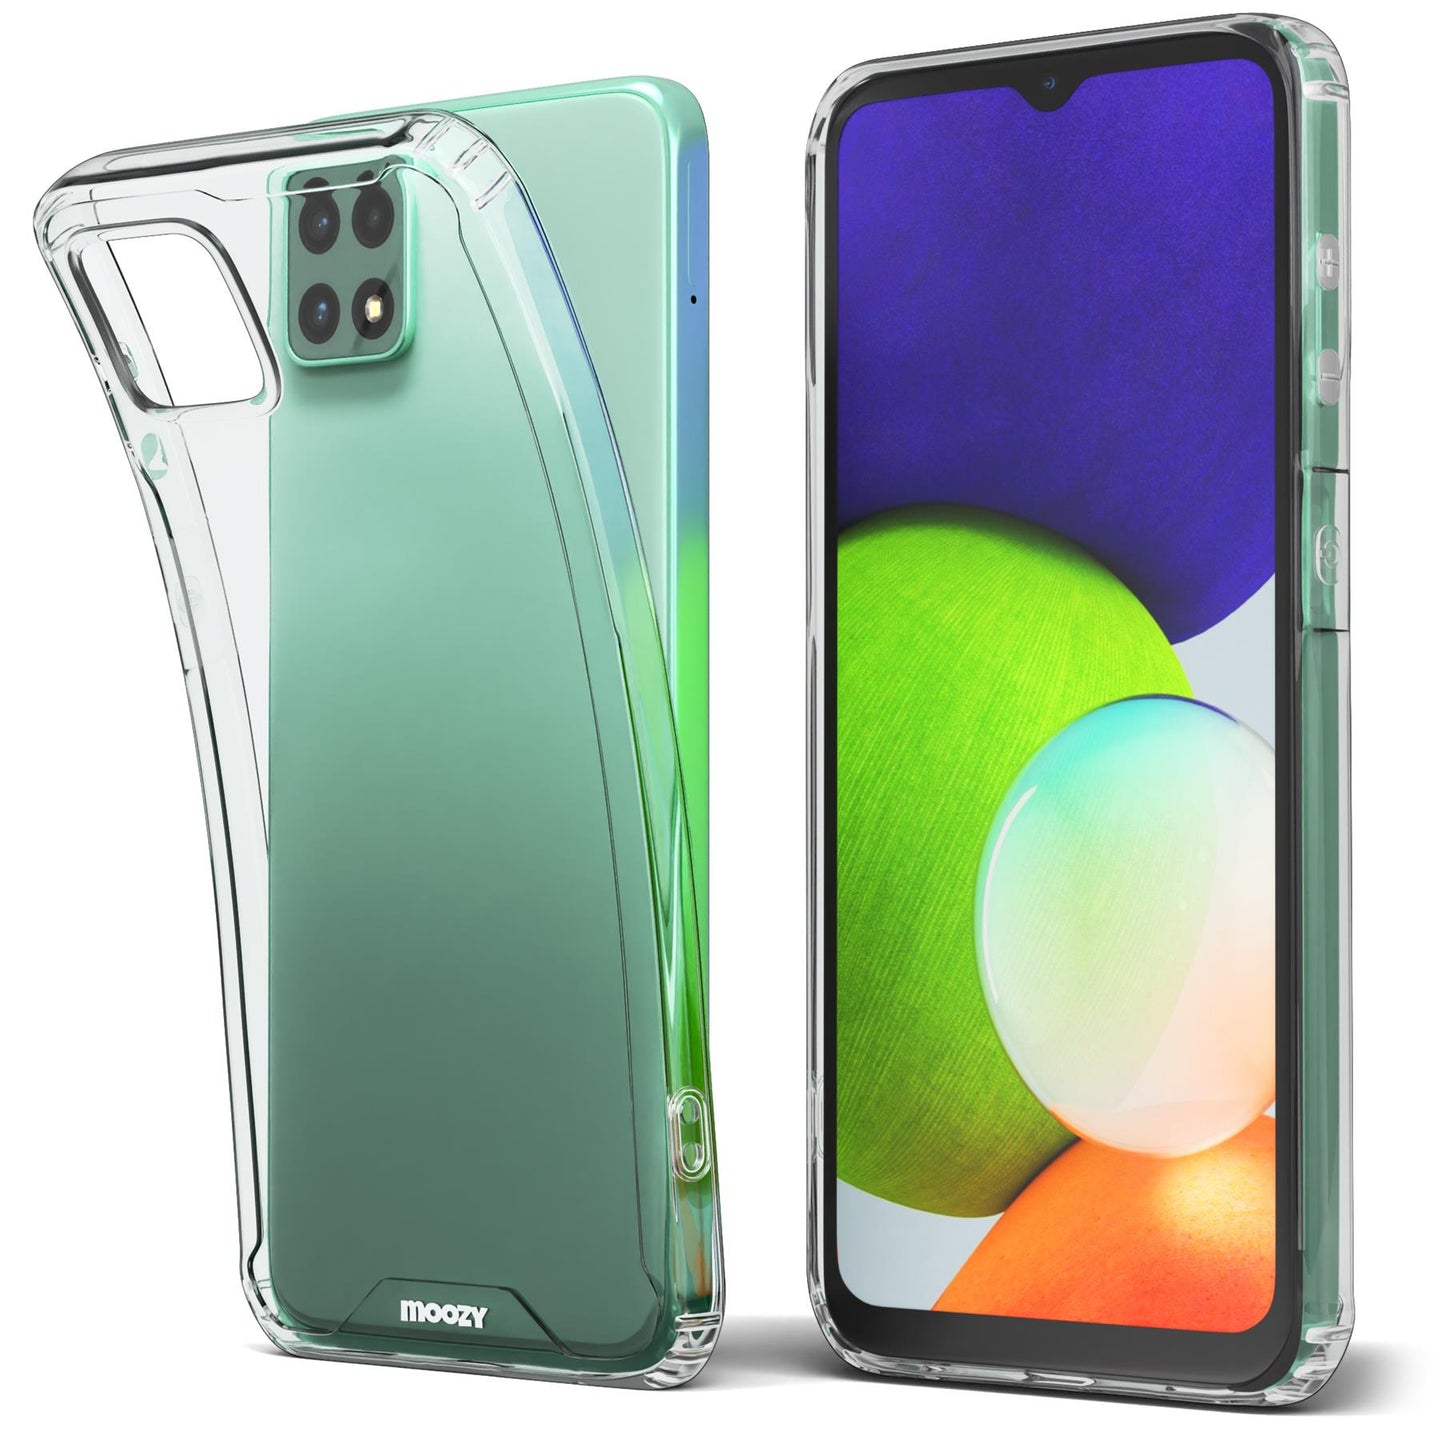 Moozy Xframe Shockproof Case for Samsung A22 5G - Transparent Rim Case, Double Colour Clear Hybrid Cover with Shock Absorbing TPU Rim